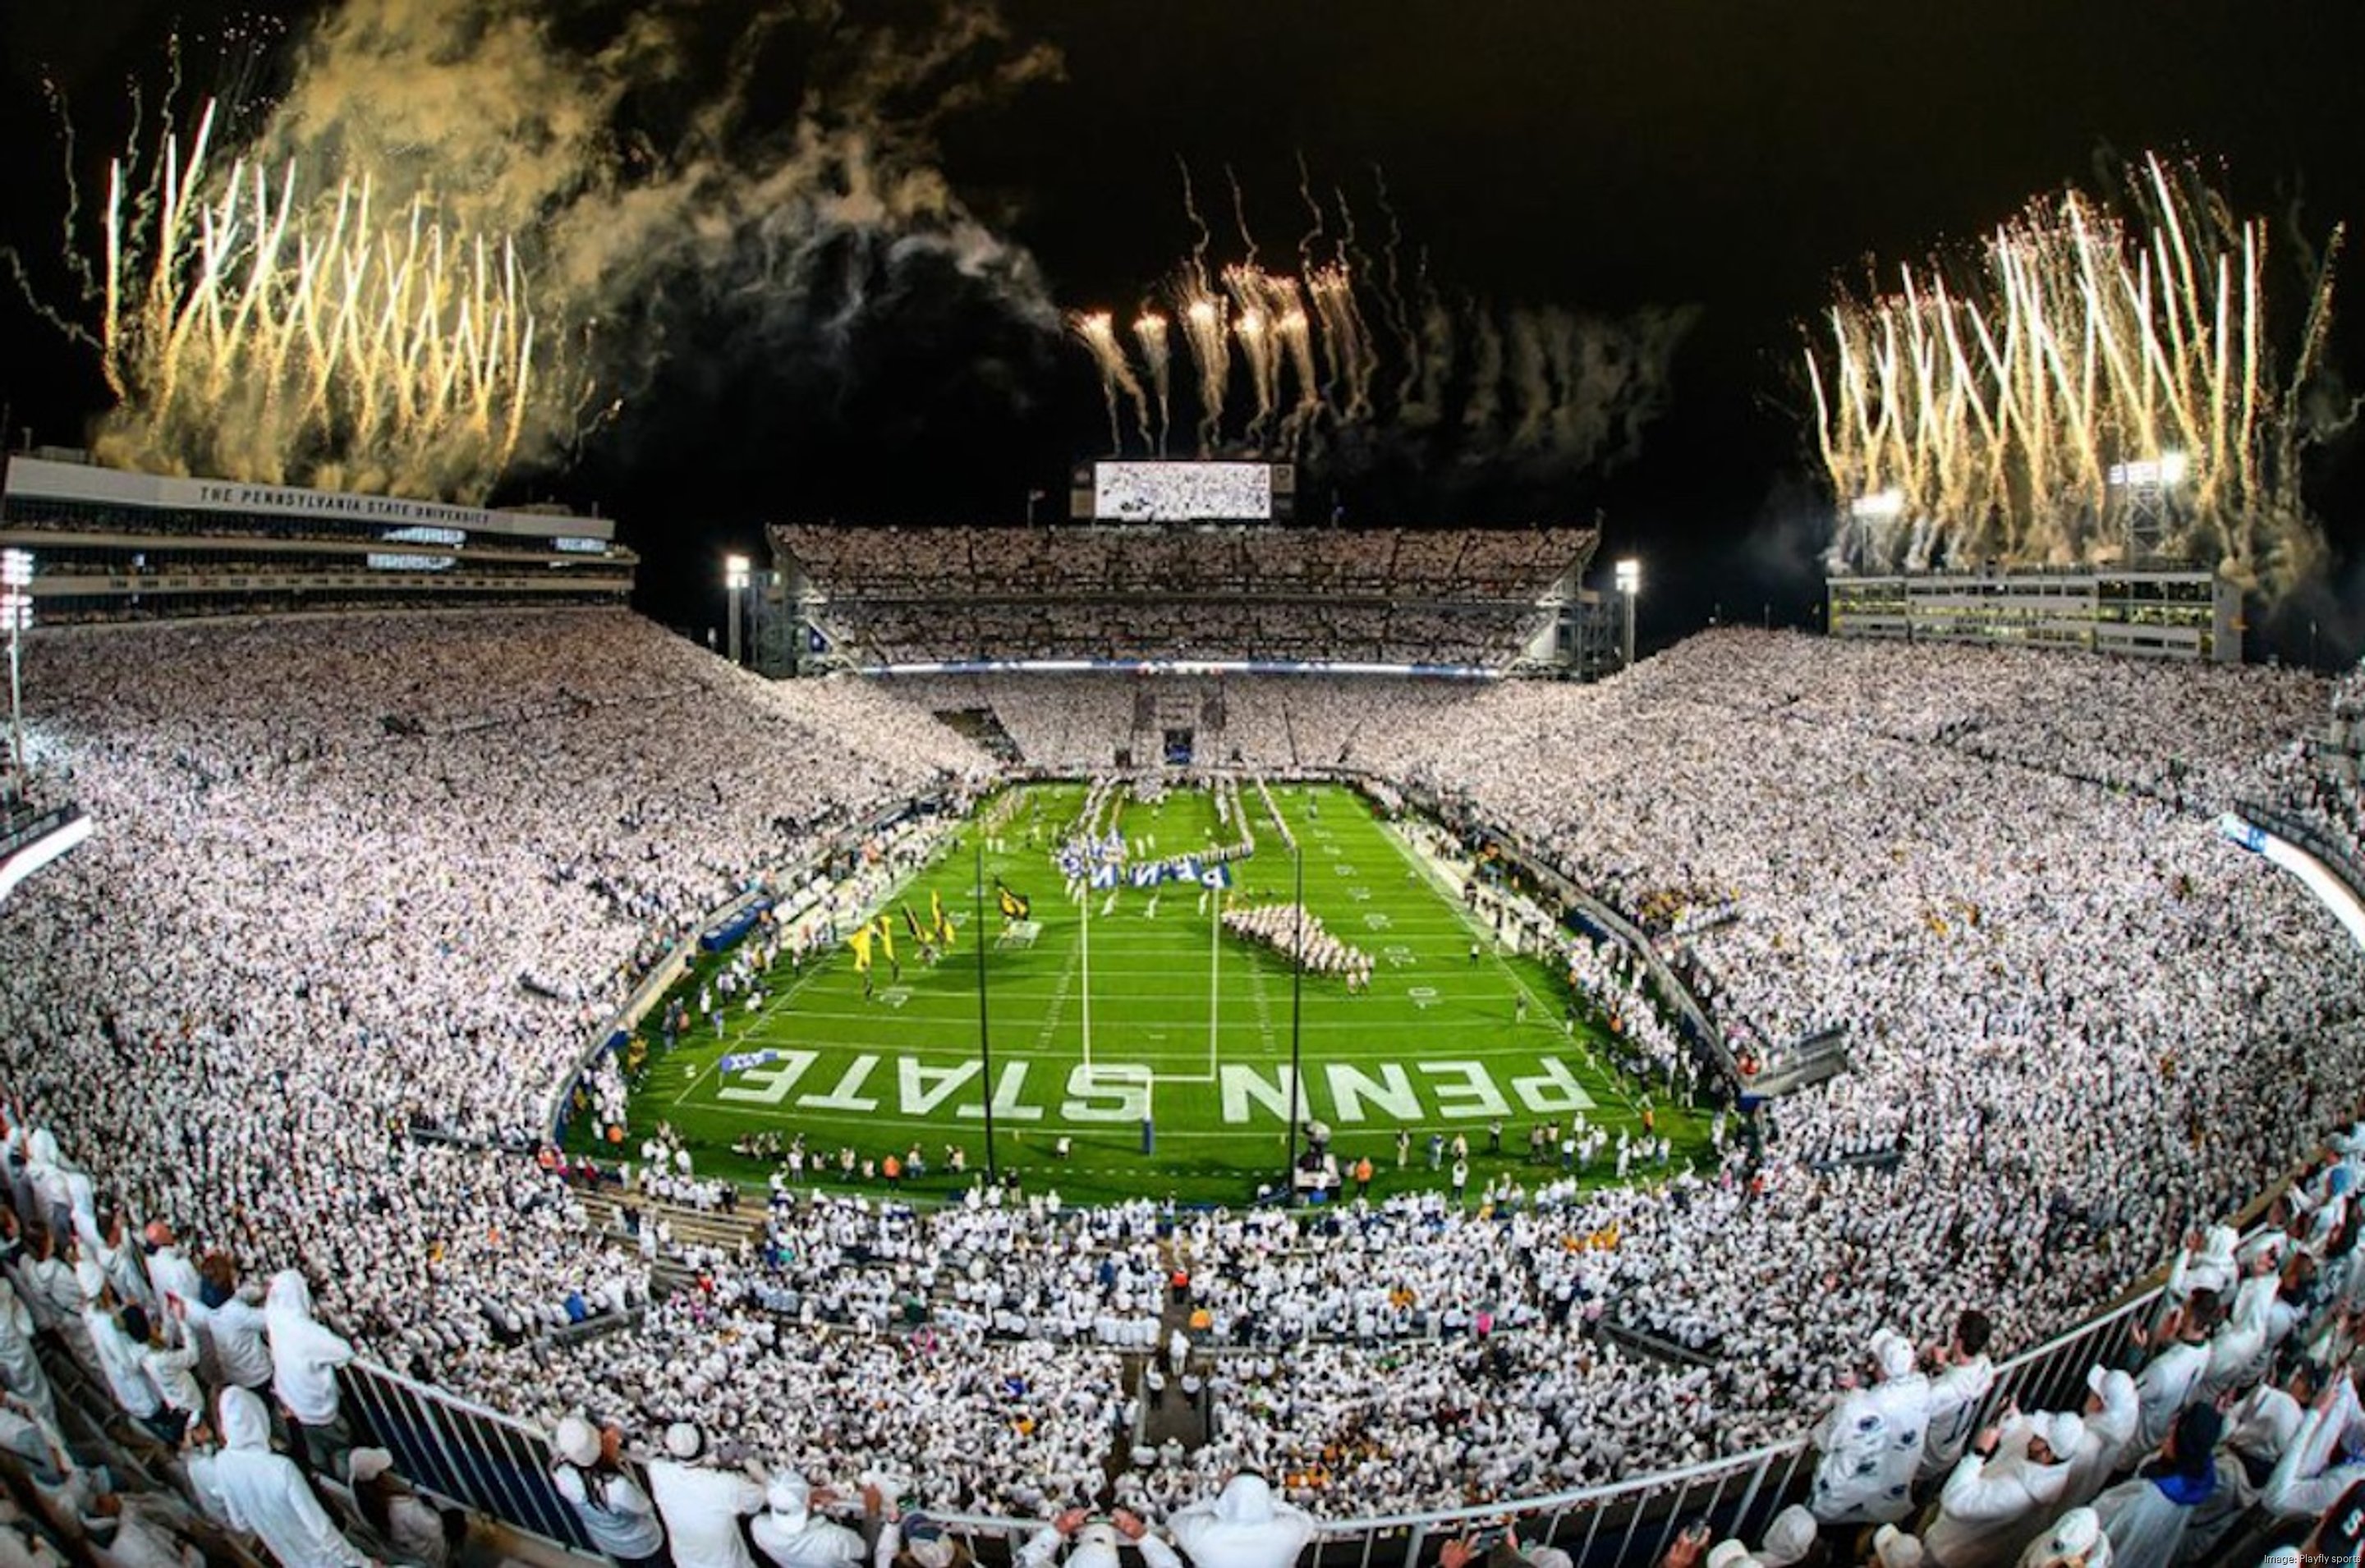 PlayFly plans to make Penn State's White Out game a weeklong event